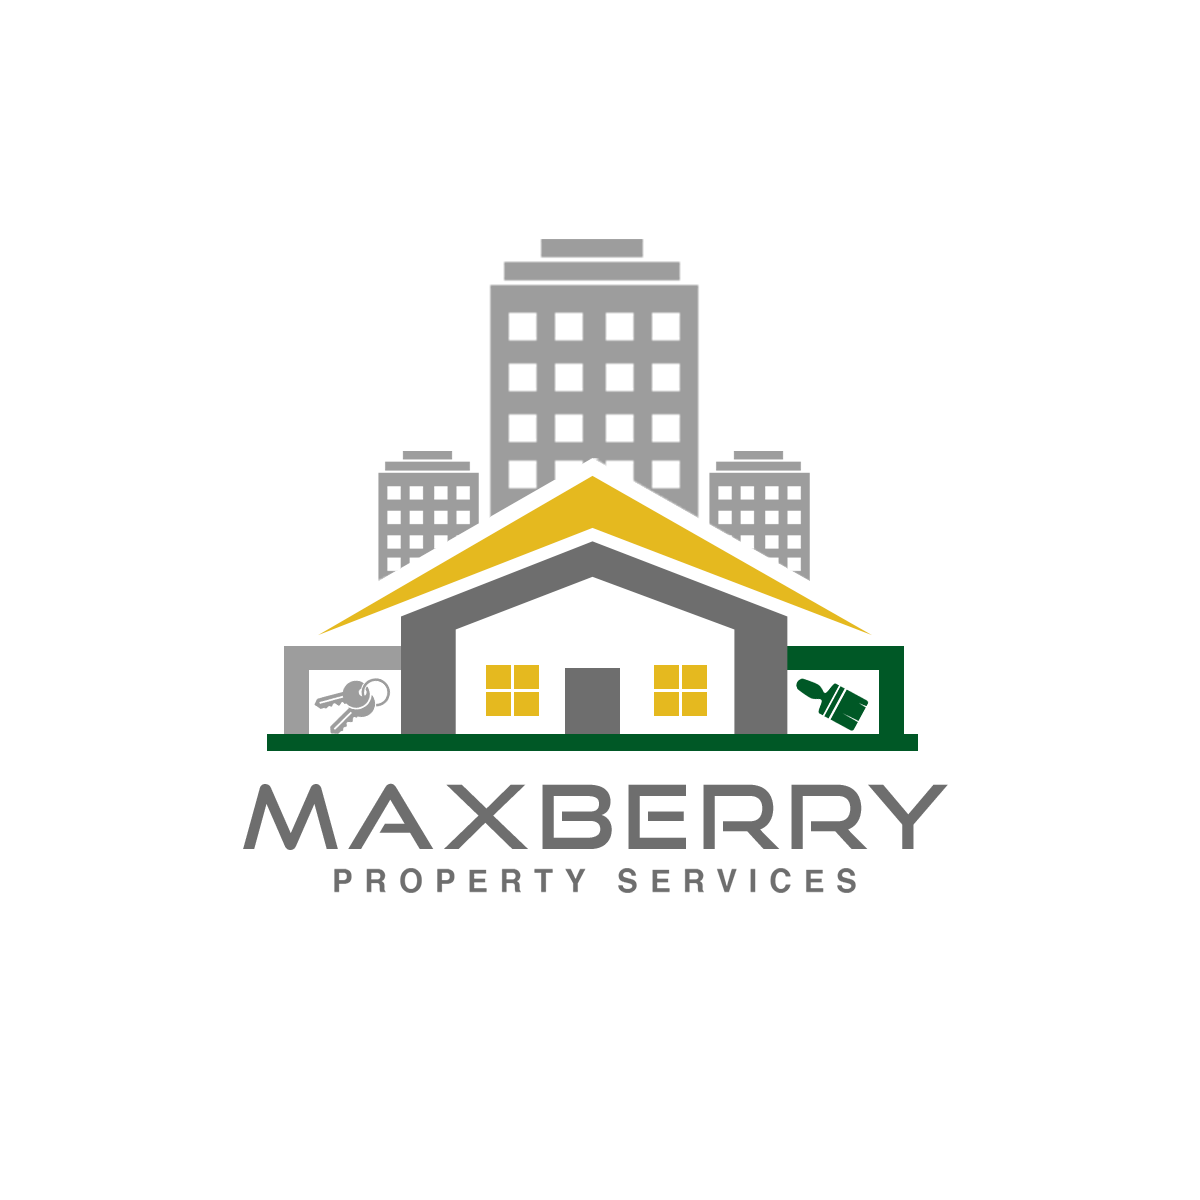 Maxberry Property Services